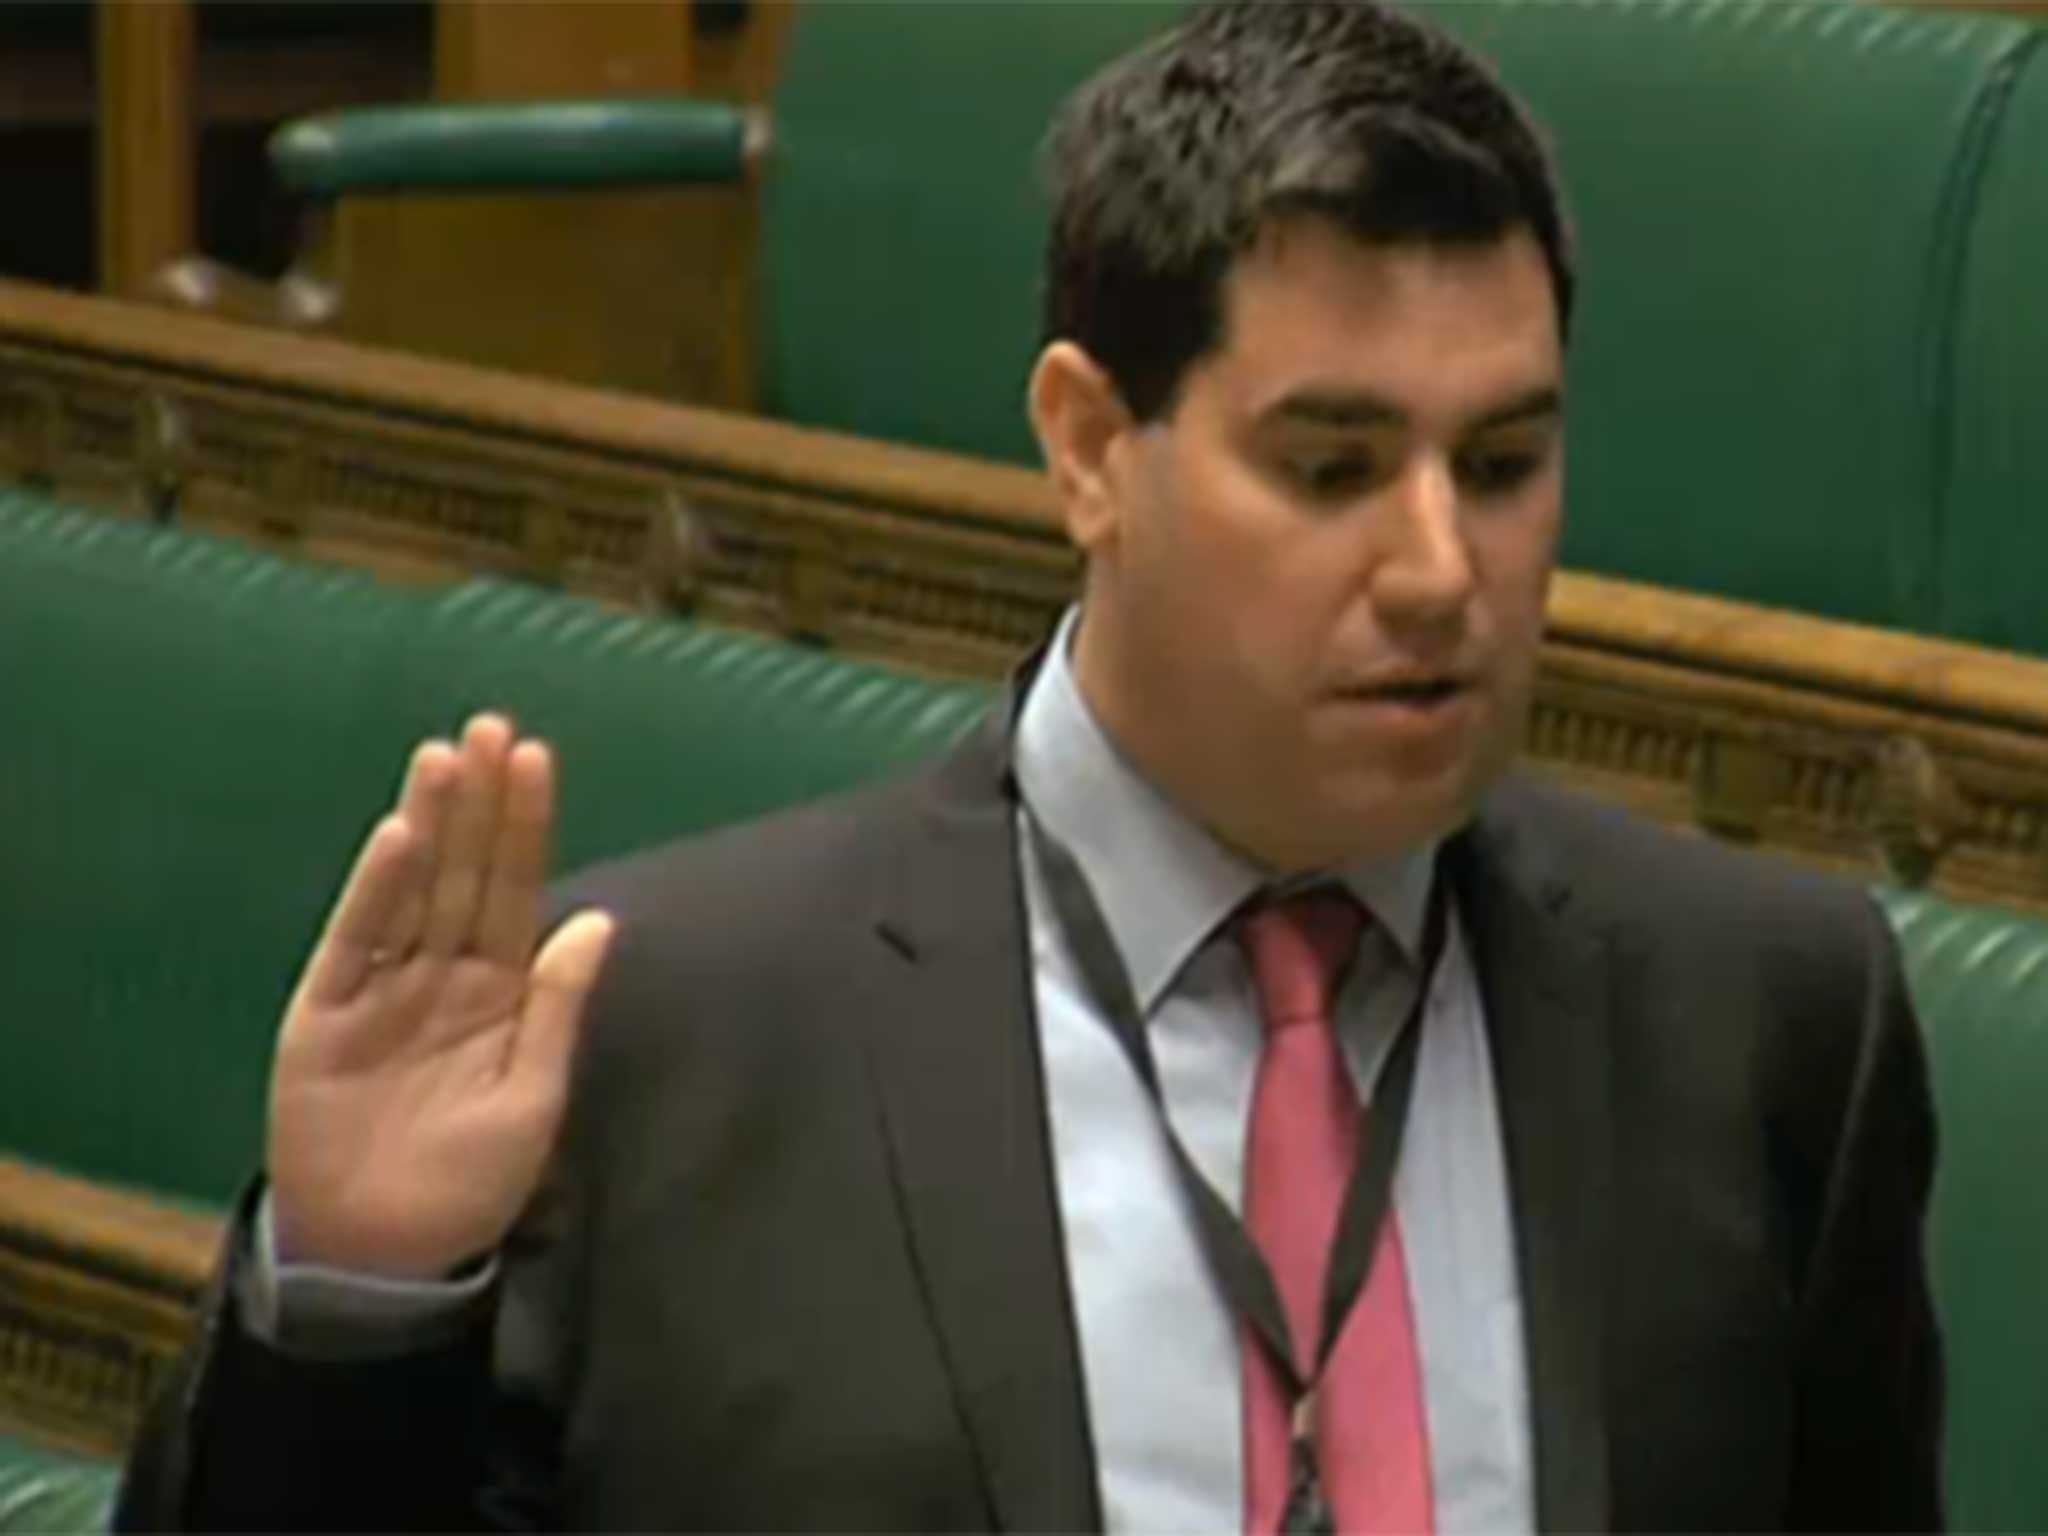 Richard Burgon MP during his swearing in ceremony in the House of Commons